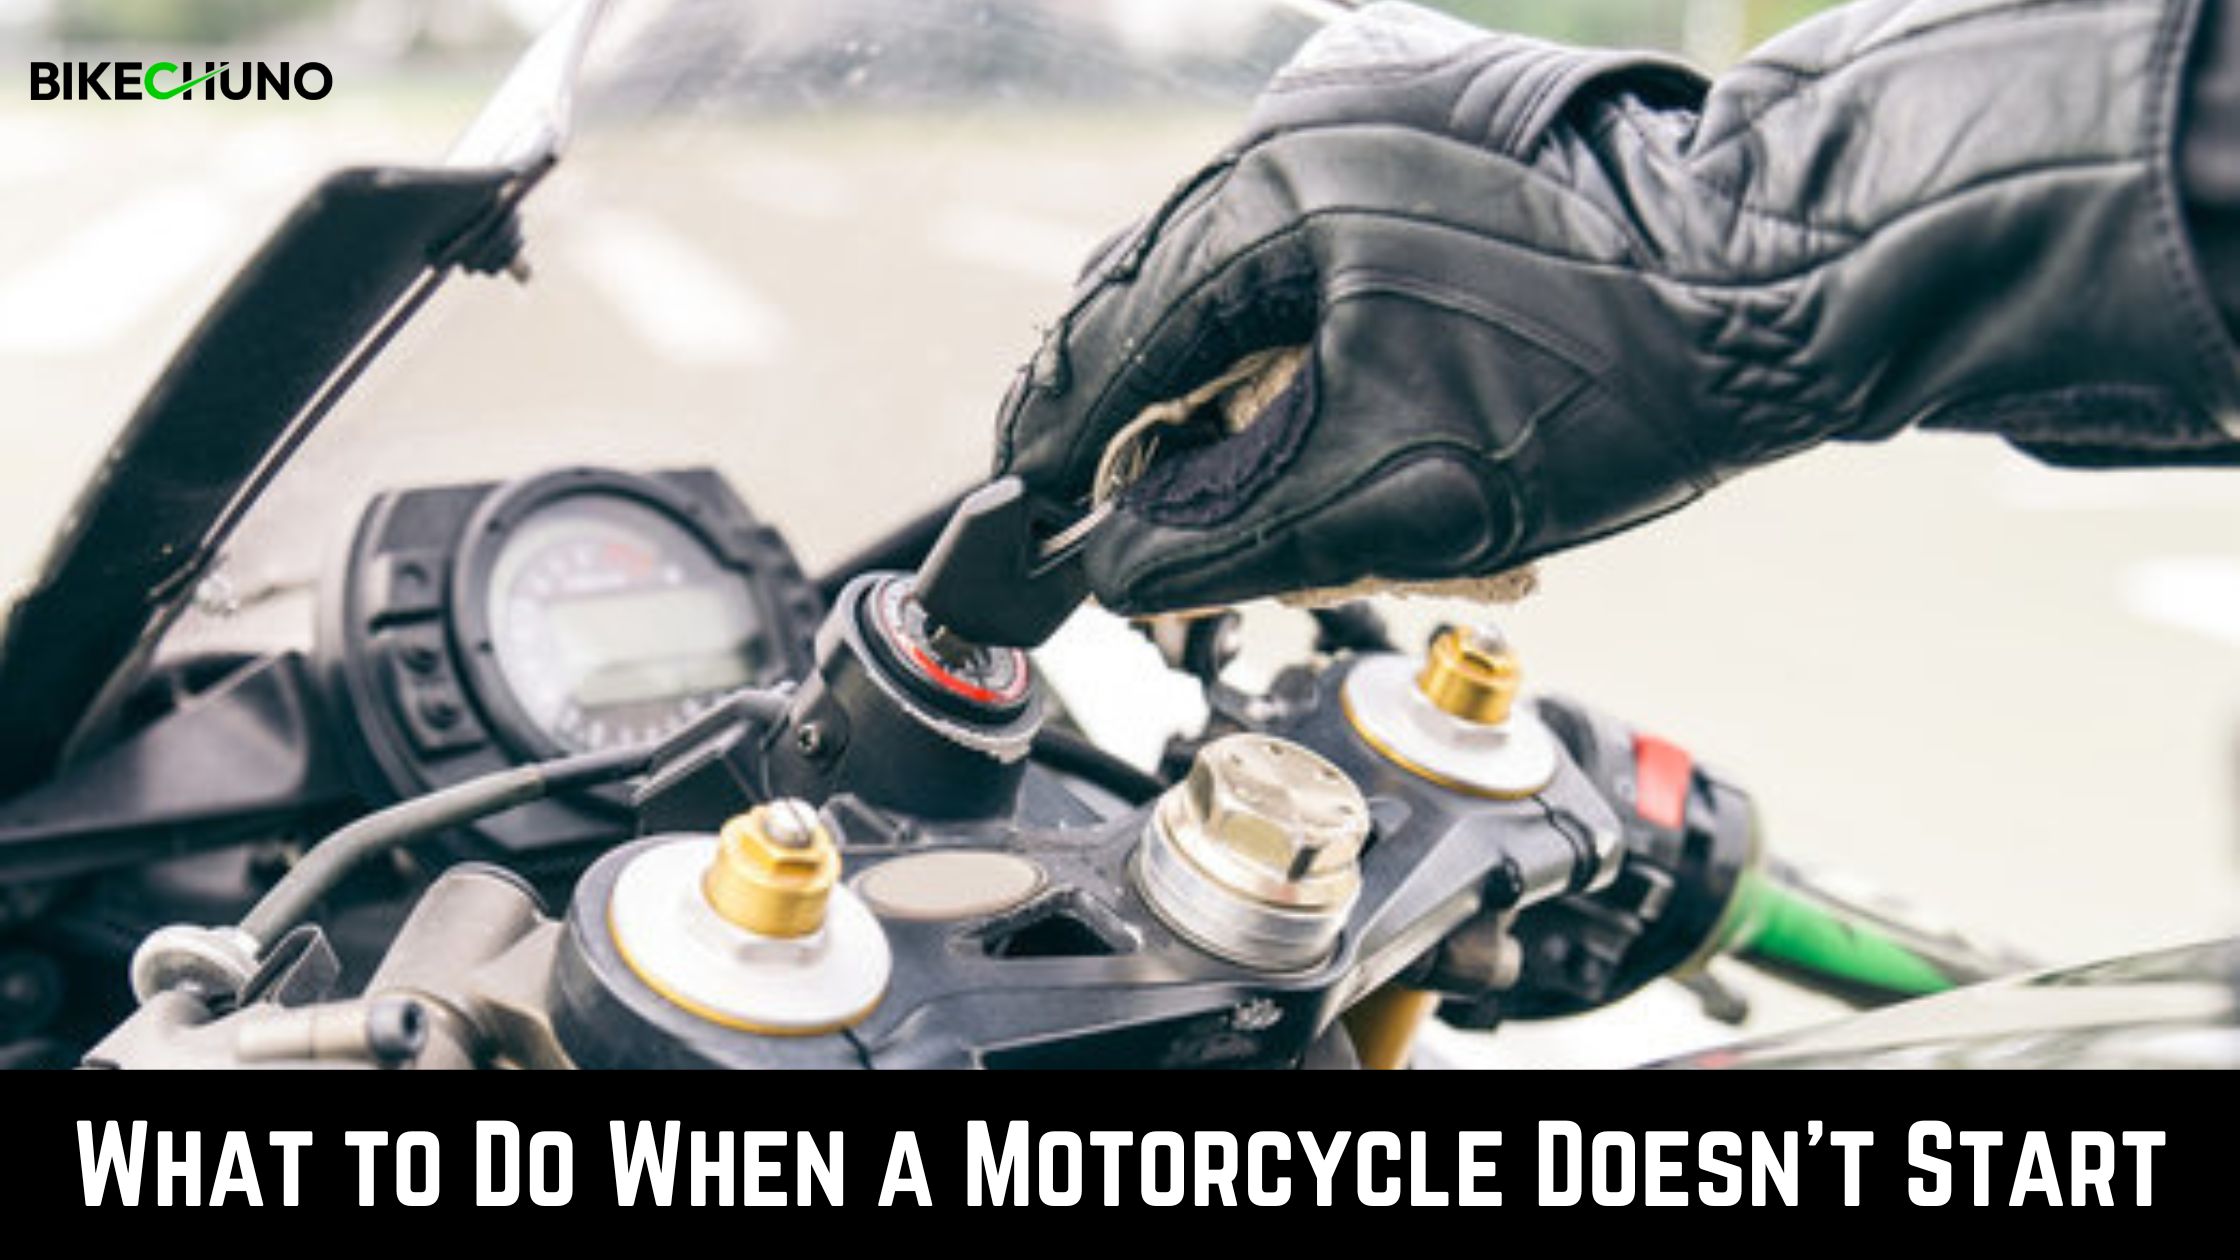 What To Do When A Motorcycle Doesn't Start